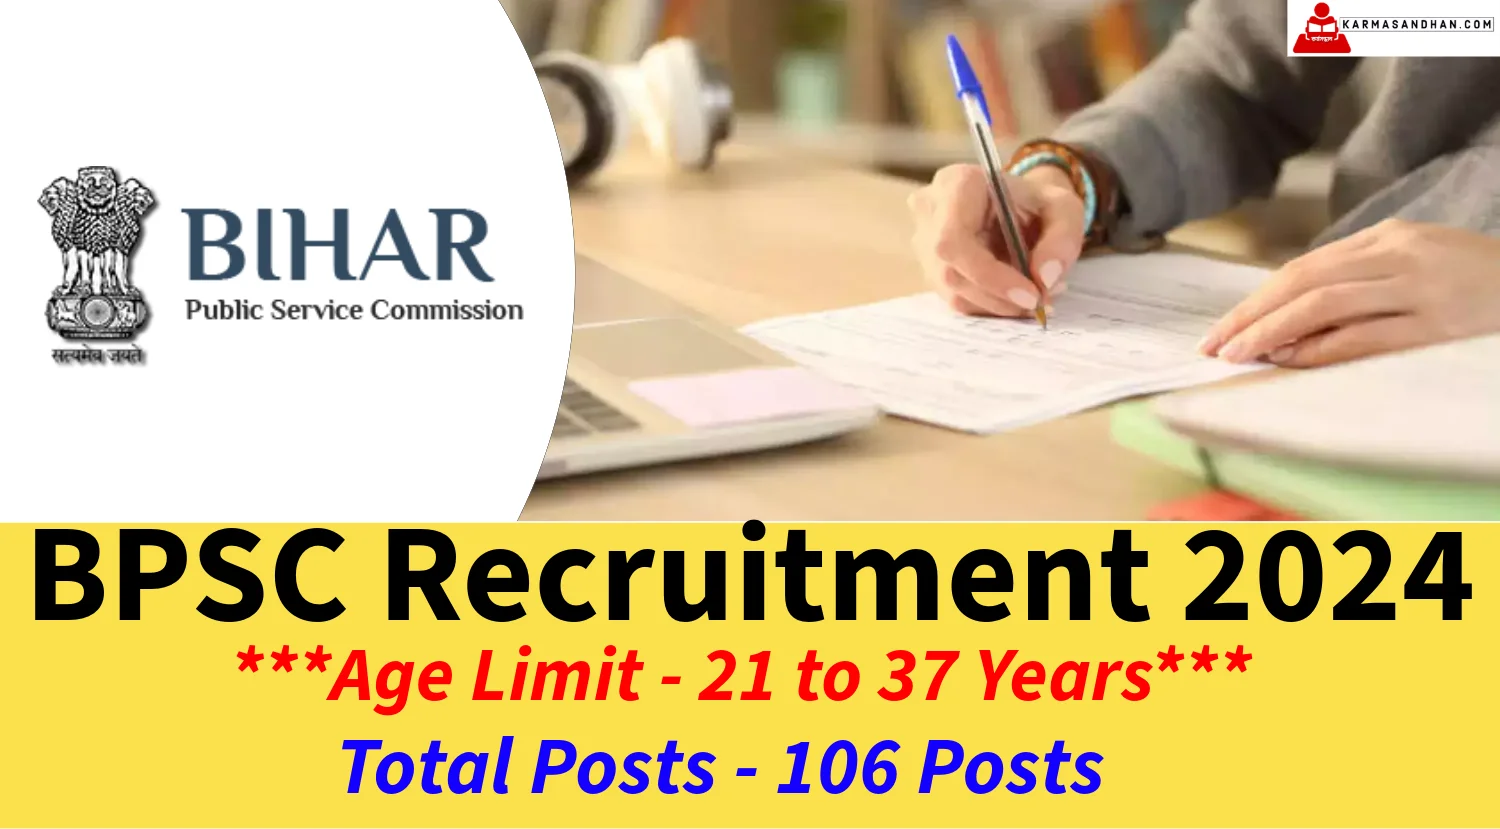 BPSC Assistant Architect Recruitment 2024 for 106 Vacancies, Check Eligibility Criteria and How to Apply – Karmasandhan